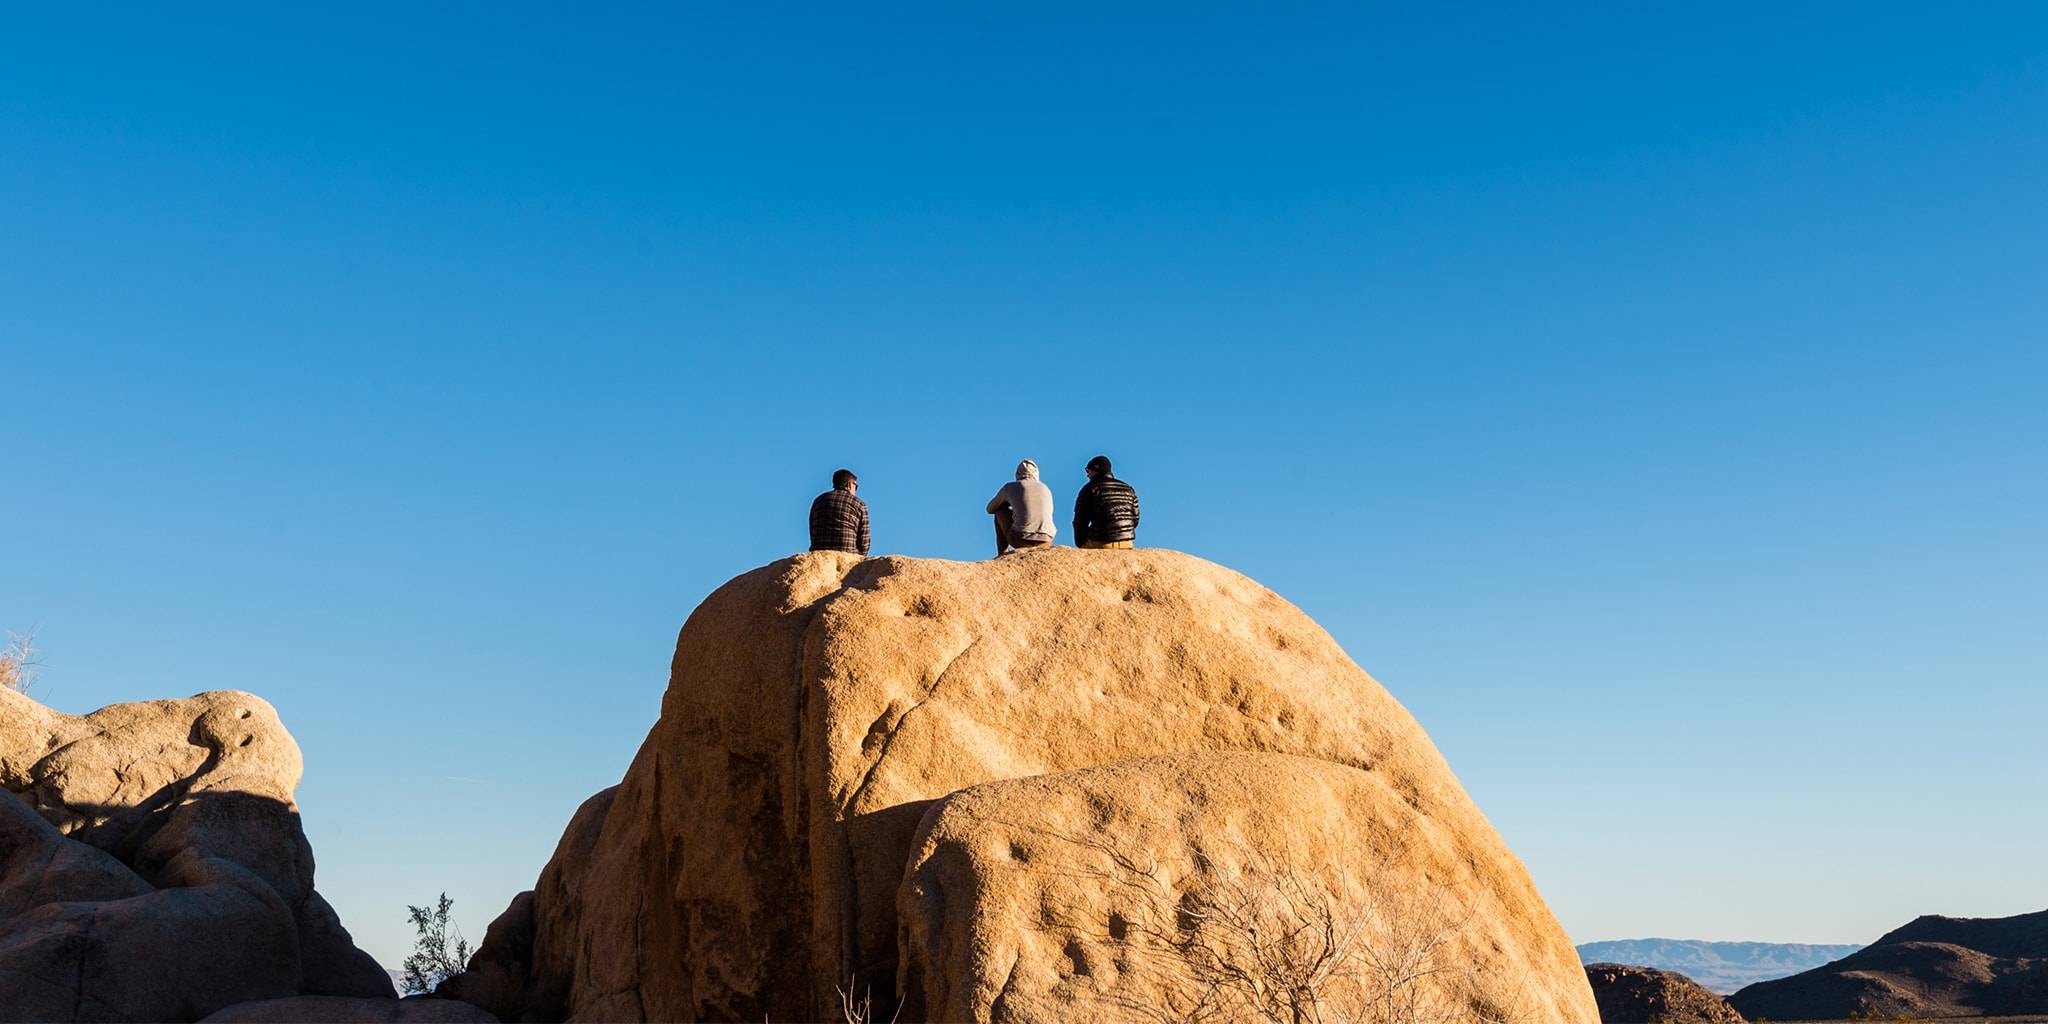 Group of three guys sitting on a large rock in Joshua Tree